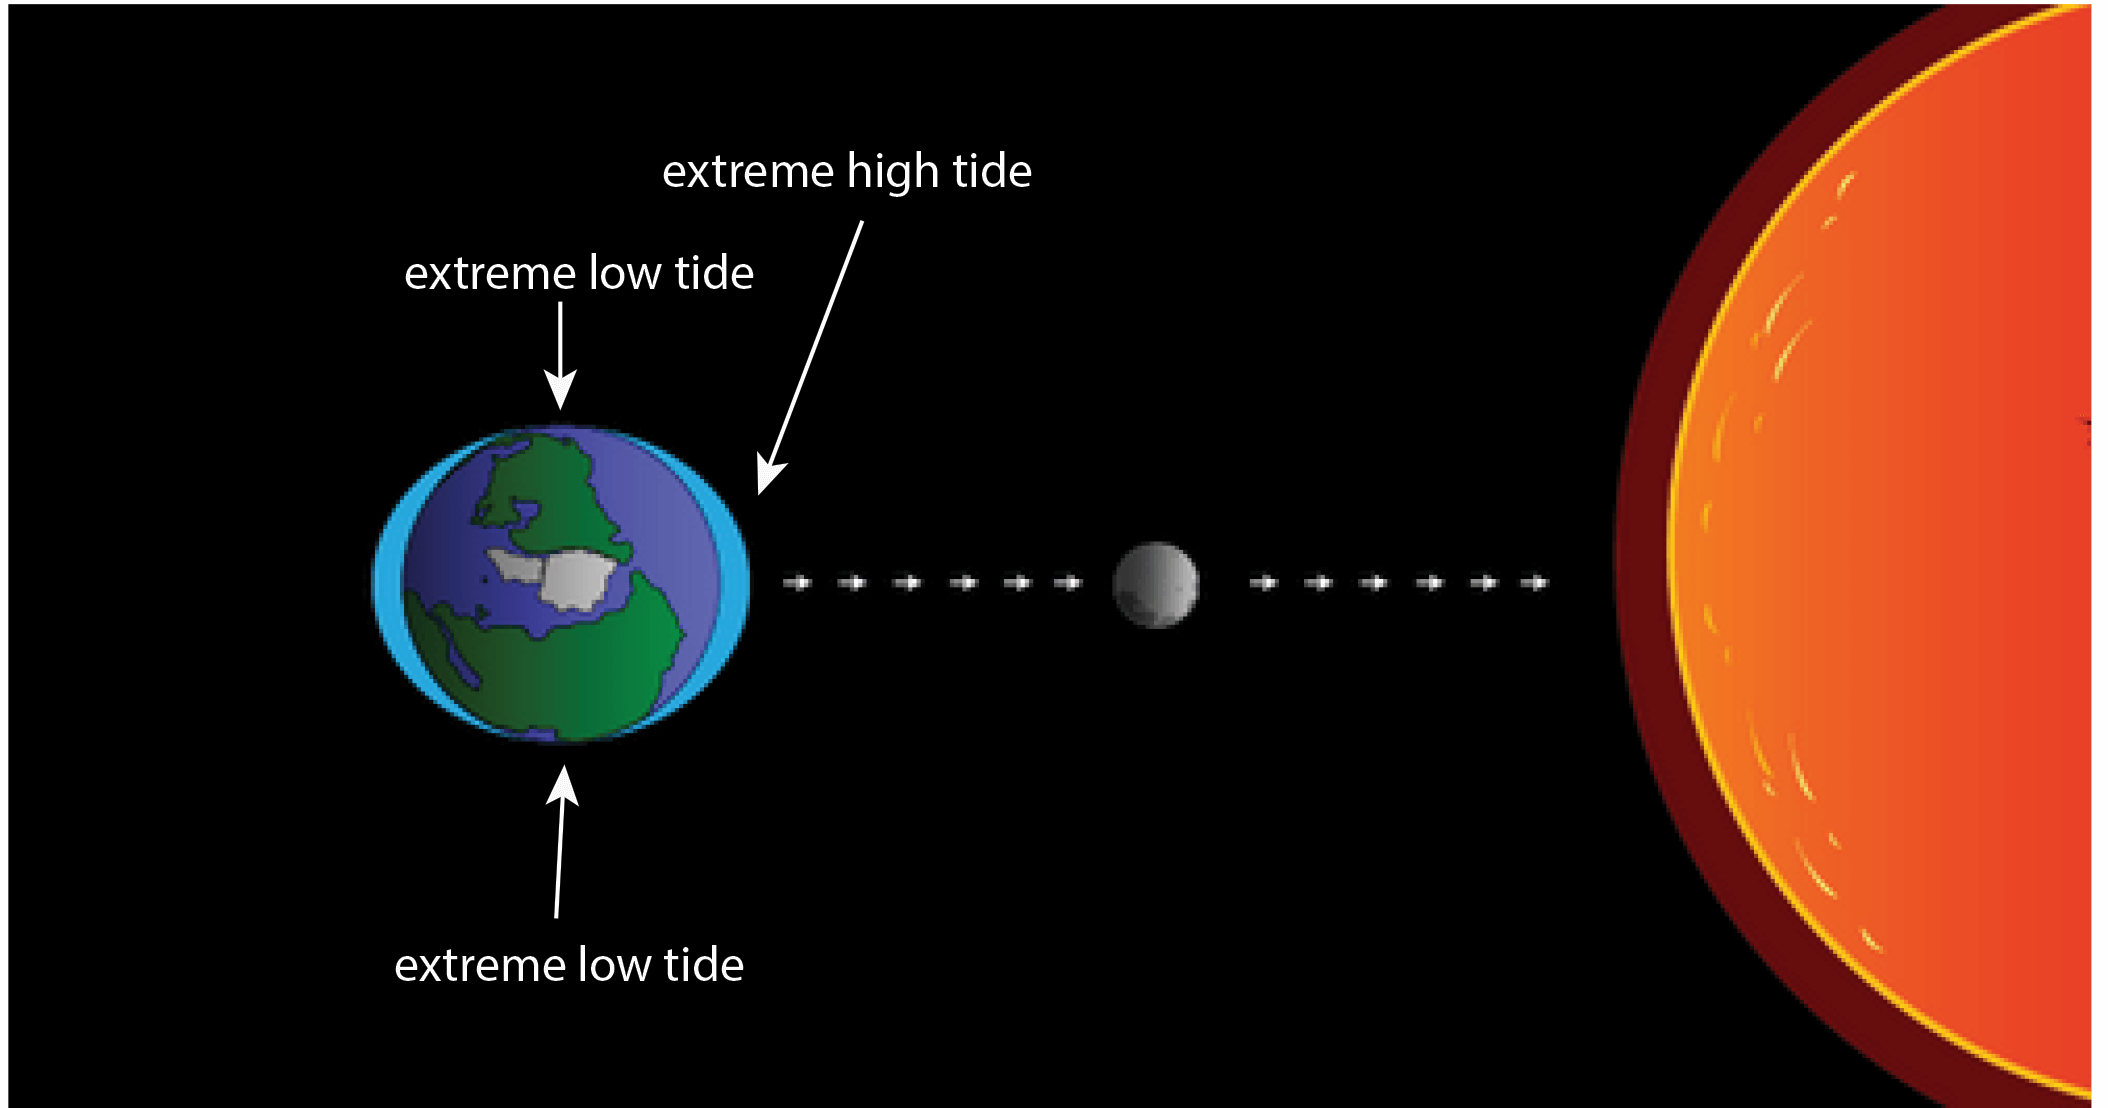 When the gravitational pull of the Sun and moon are combined, you get more extreme high and low tides. This explains high and low tides that happen about every two weeks. Note: this figure is not to scale. The Sun is much bigger and farther away.